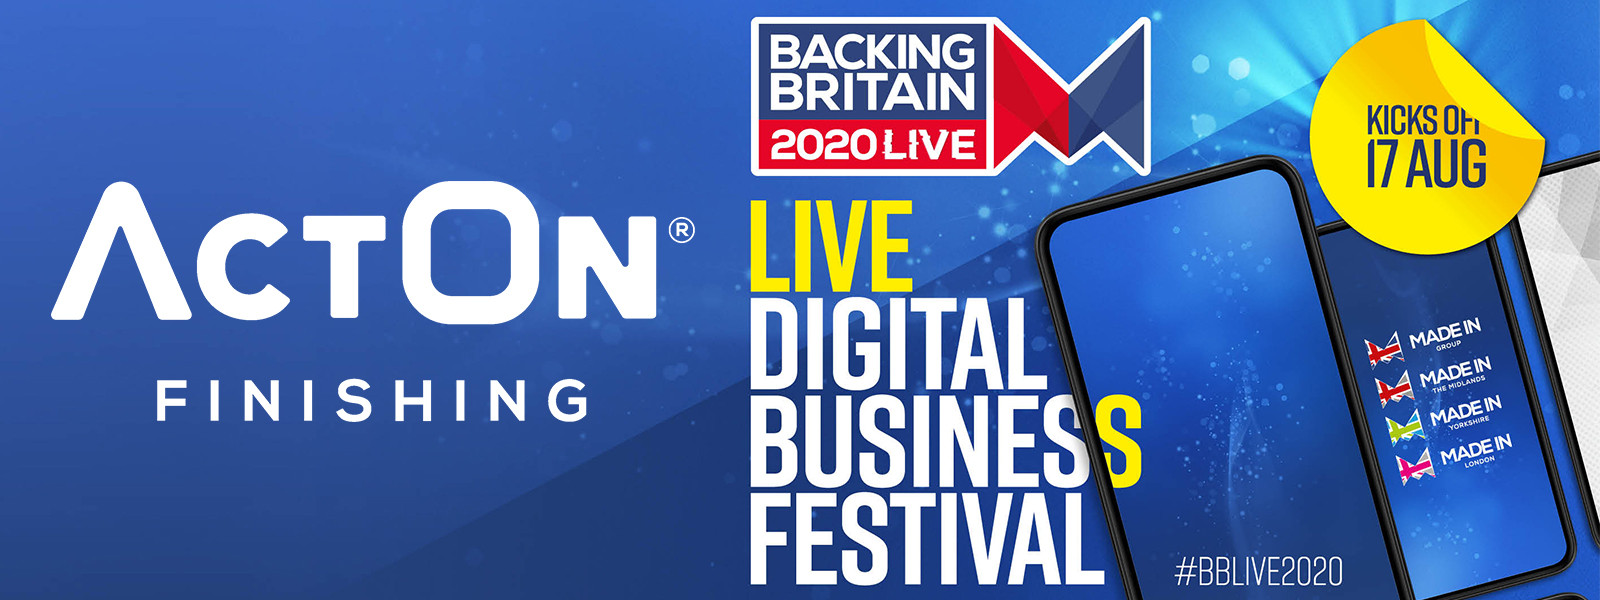 ActOn Finishing plans to support the UK’s manufacturing sector at Backing Britain 2020 Virtual Exhibition